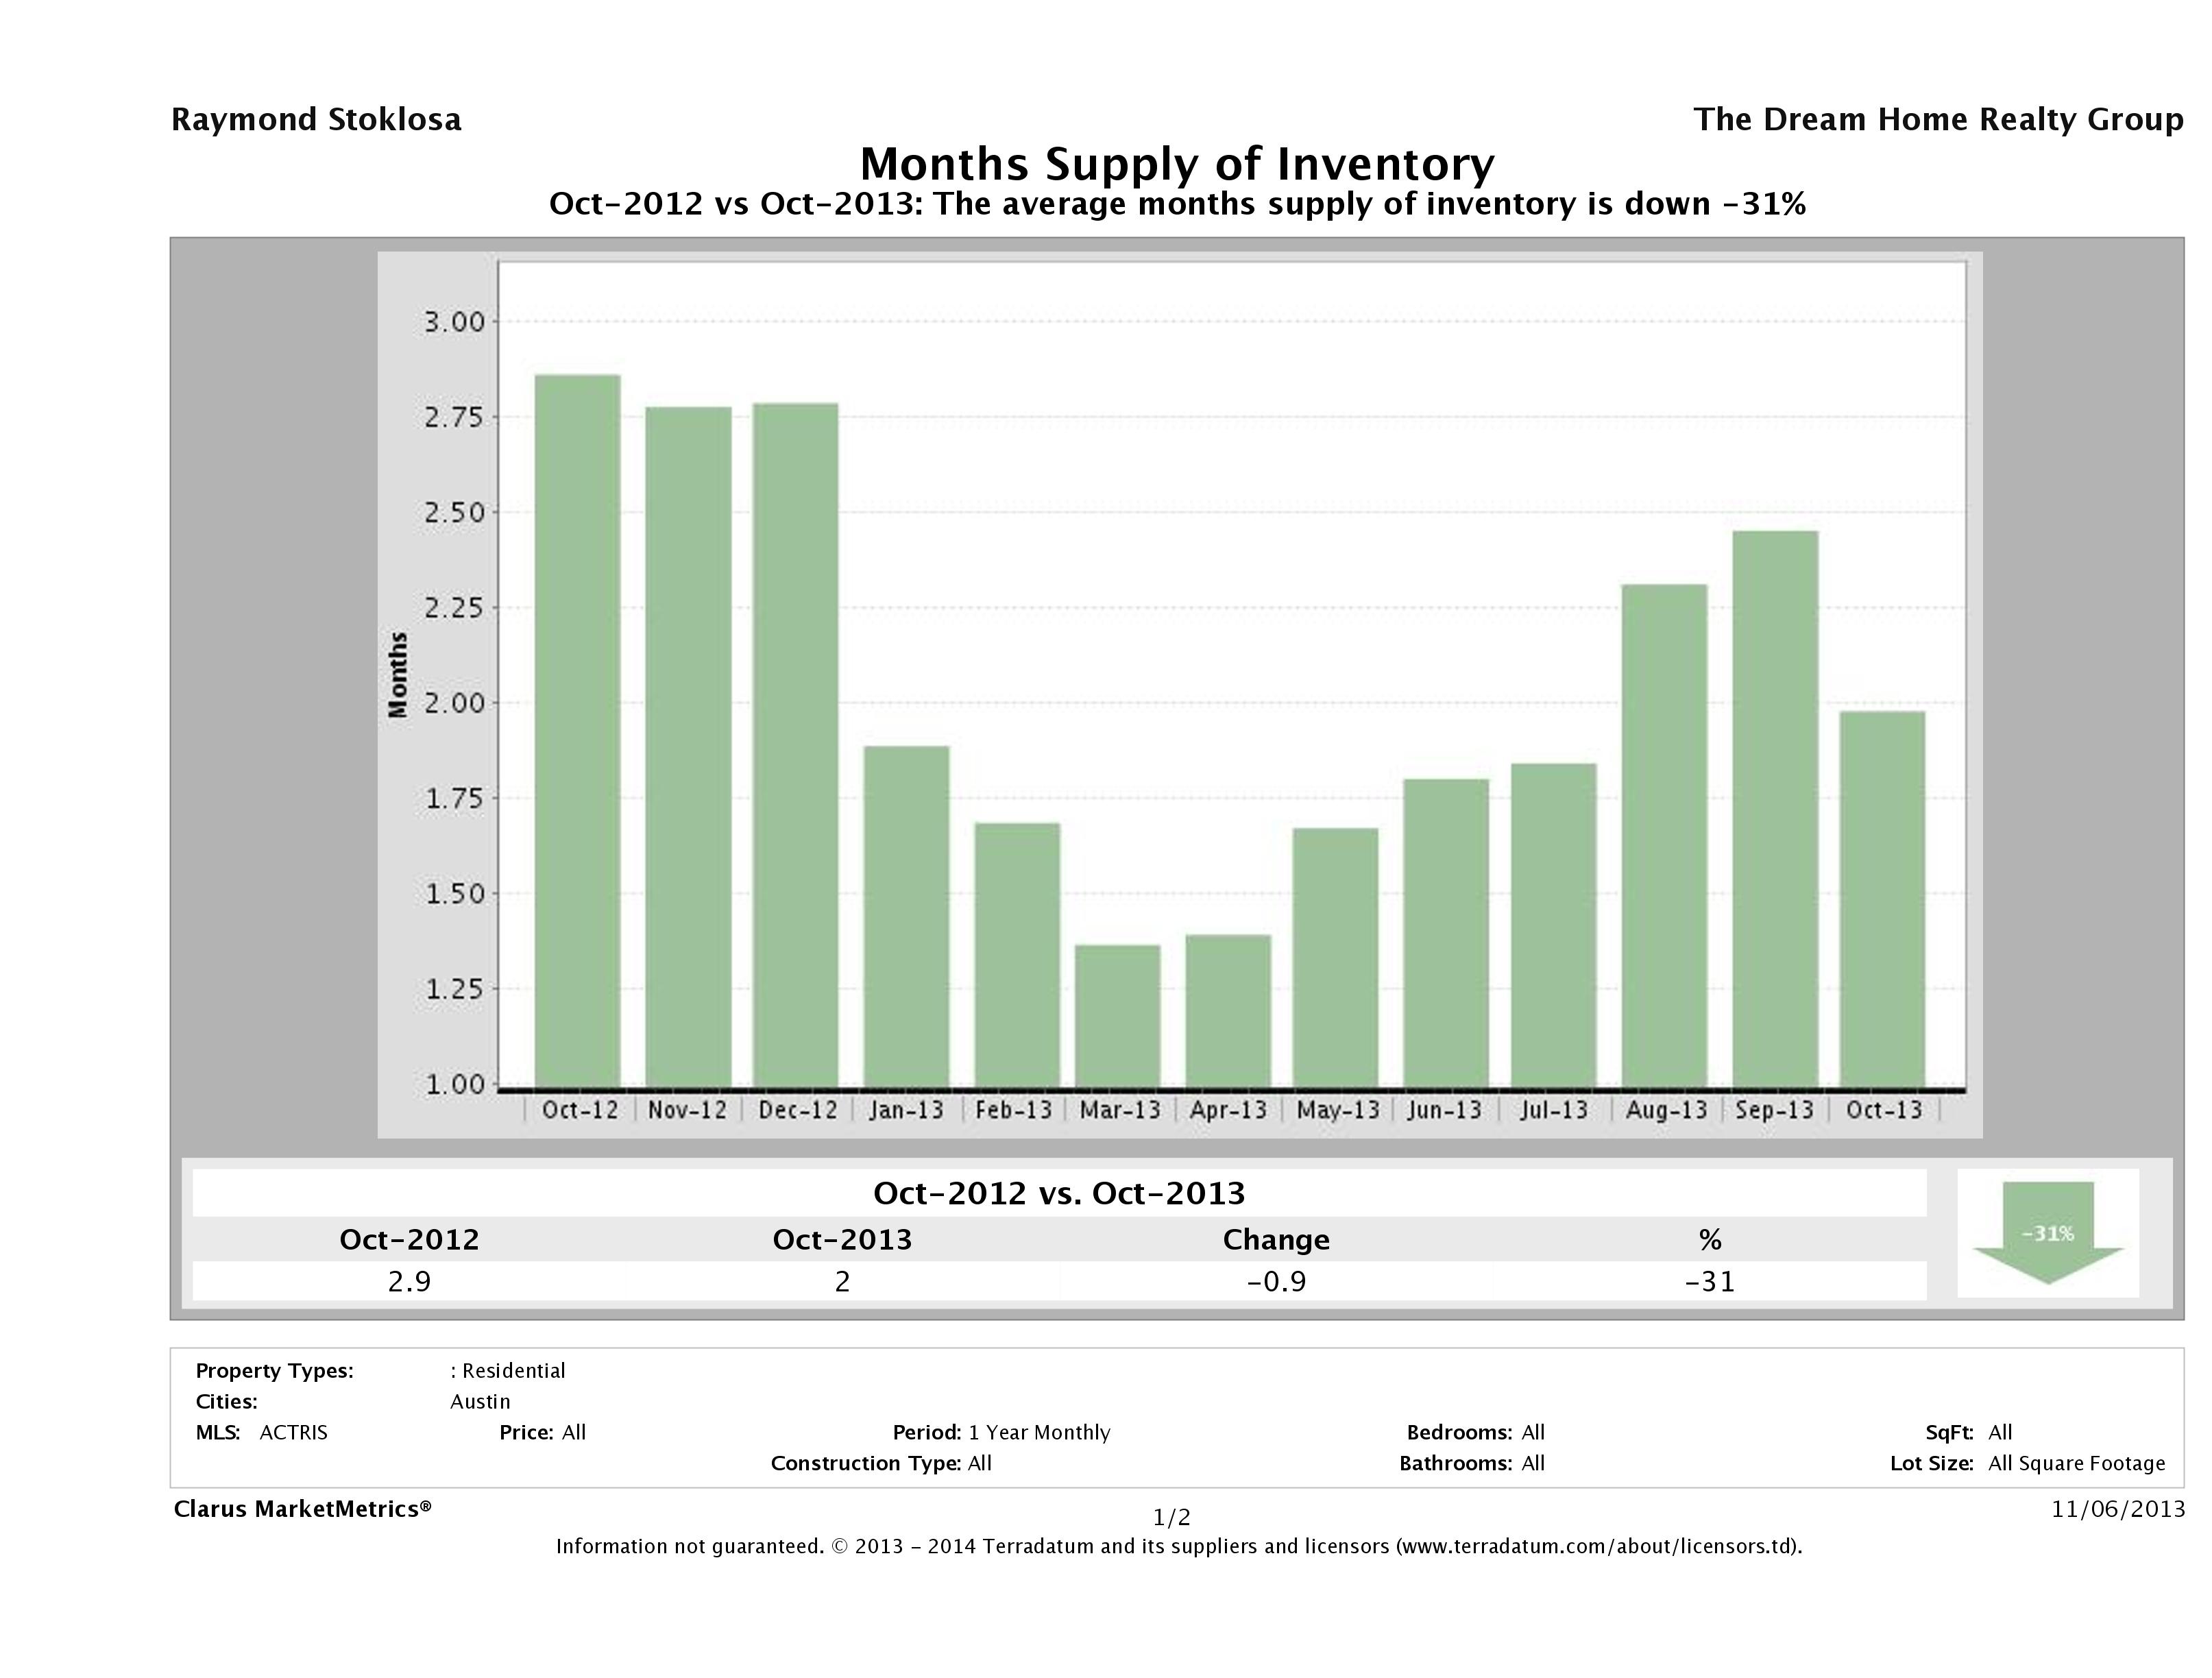 Austin single family home months inventory October 2013